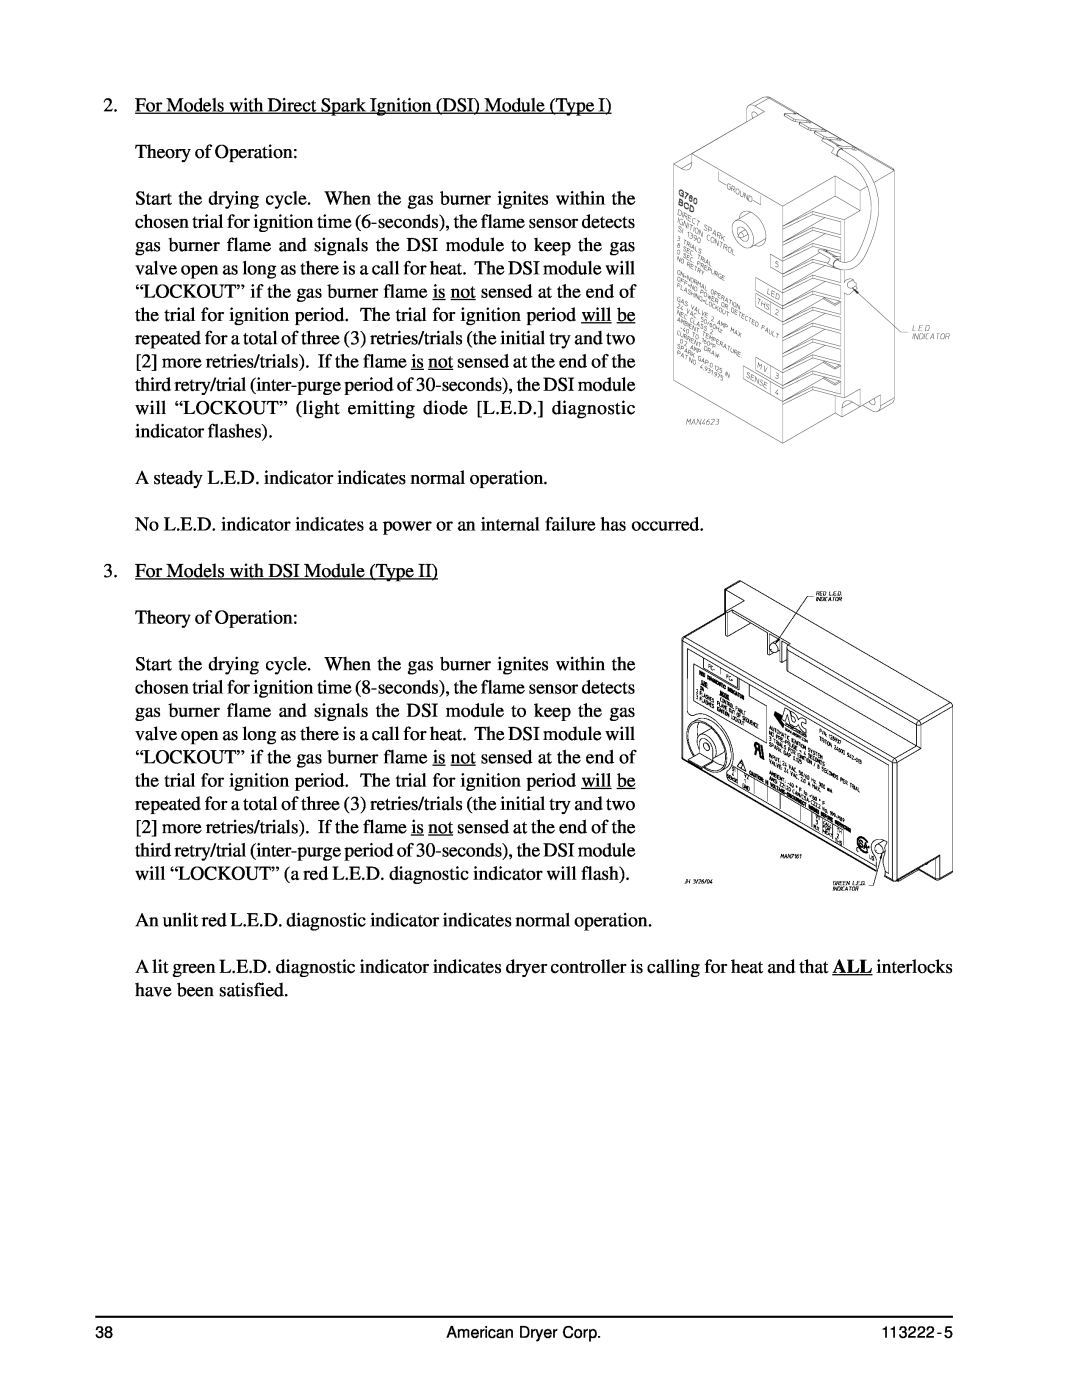 American Dryer Corp AD-24 Phase 7 installation manual For Models with Direct Spark Ignition DSI Module Type 